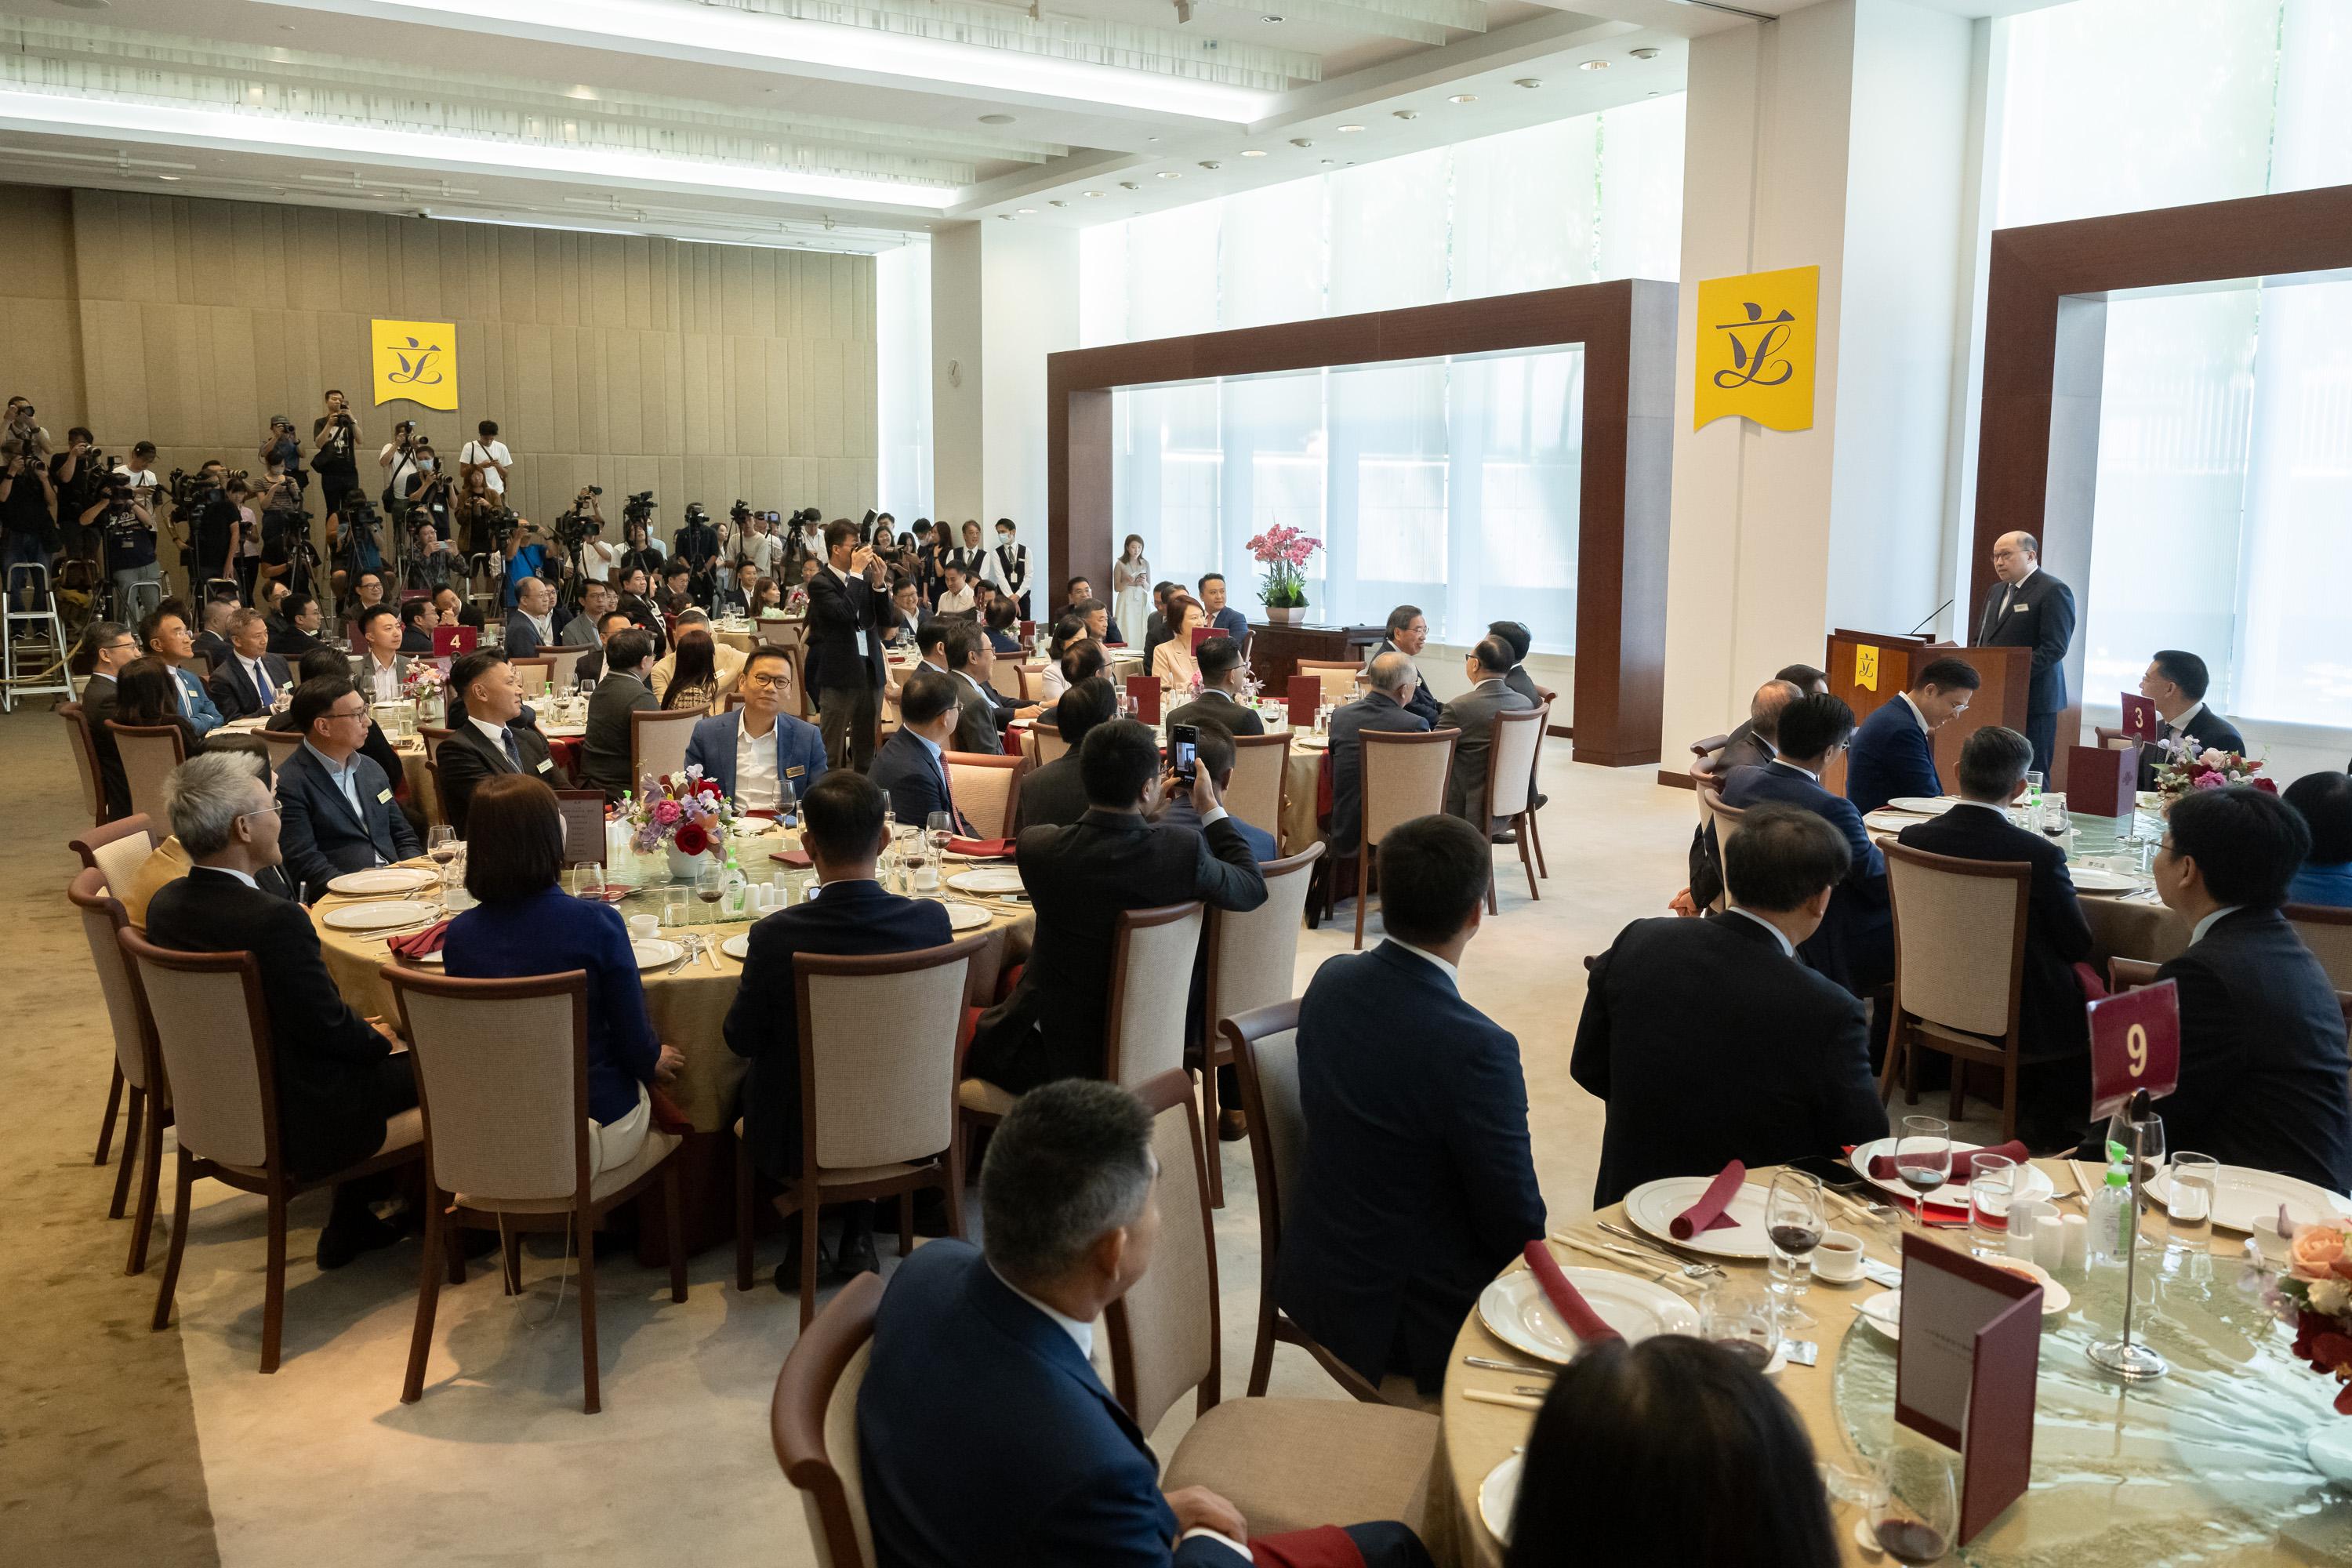 The President of the Legislative Council (LegCo), Mr Andrew Leung, hosts a luncheon for LegCo Members and the Director and other officials of the Liaison Office of the Central People's Government in the Hong Kong Special Administrative Region. 
